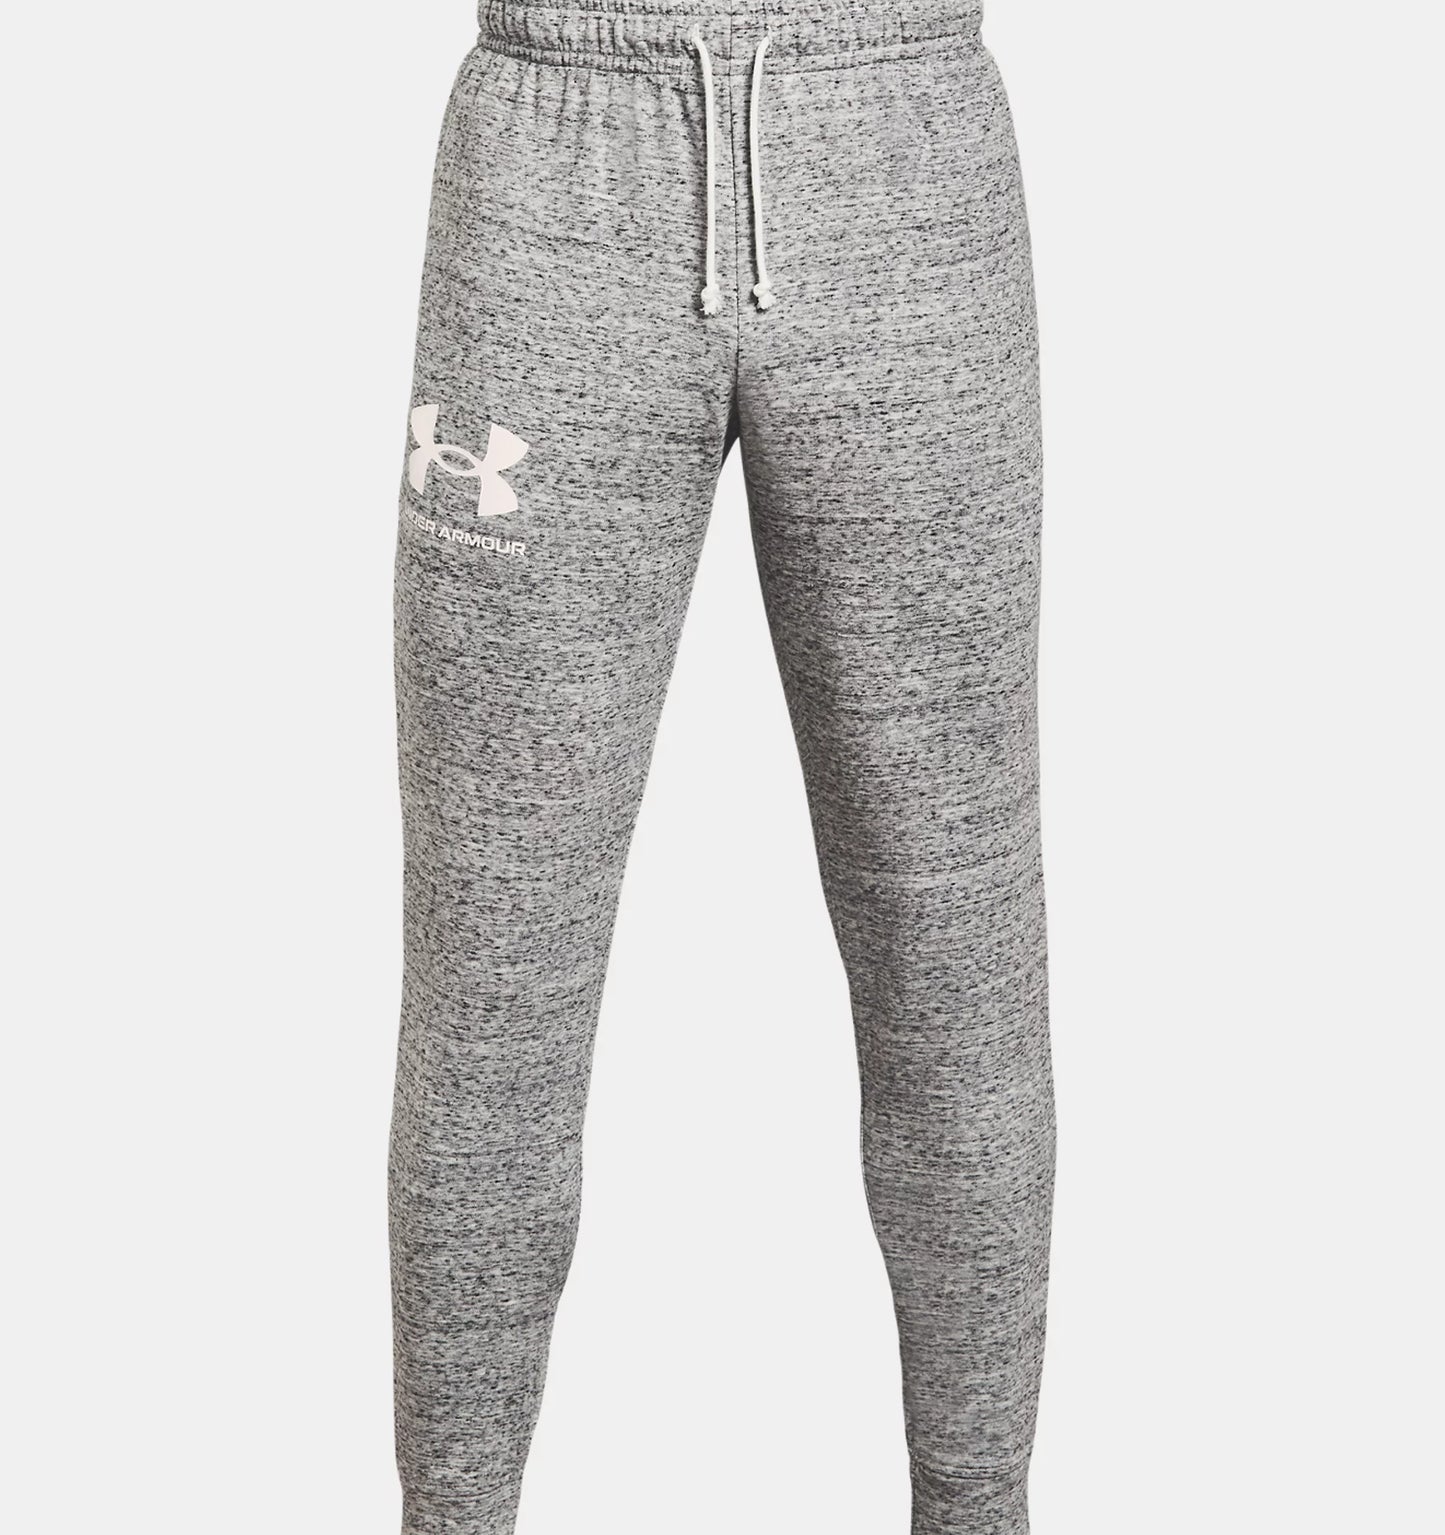 Onyx White Rival Terry Joggers